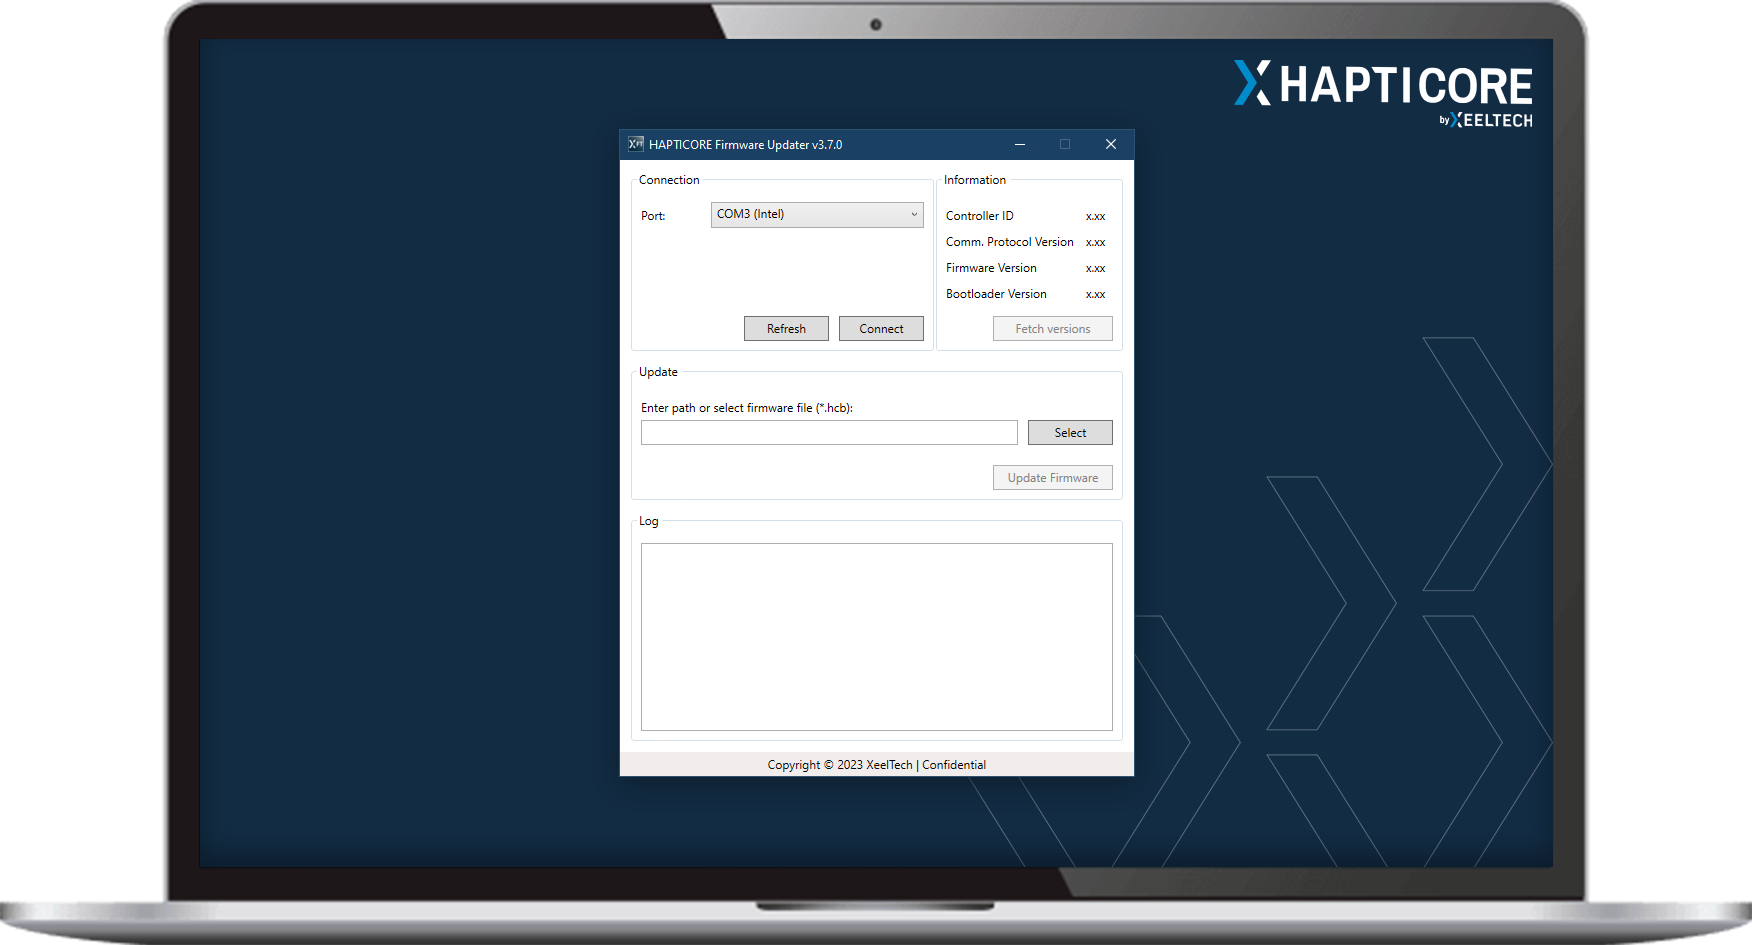 Notebook running the HAPTICORE Firmware Update Tool to update the Eval Kit firmware.